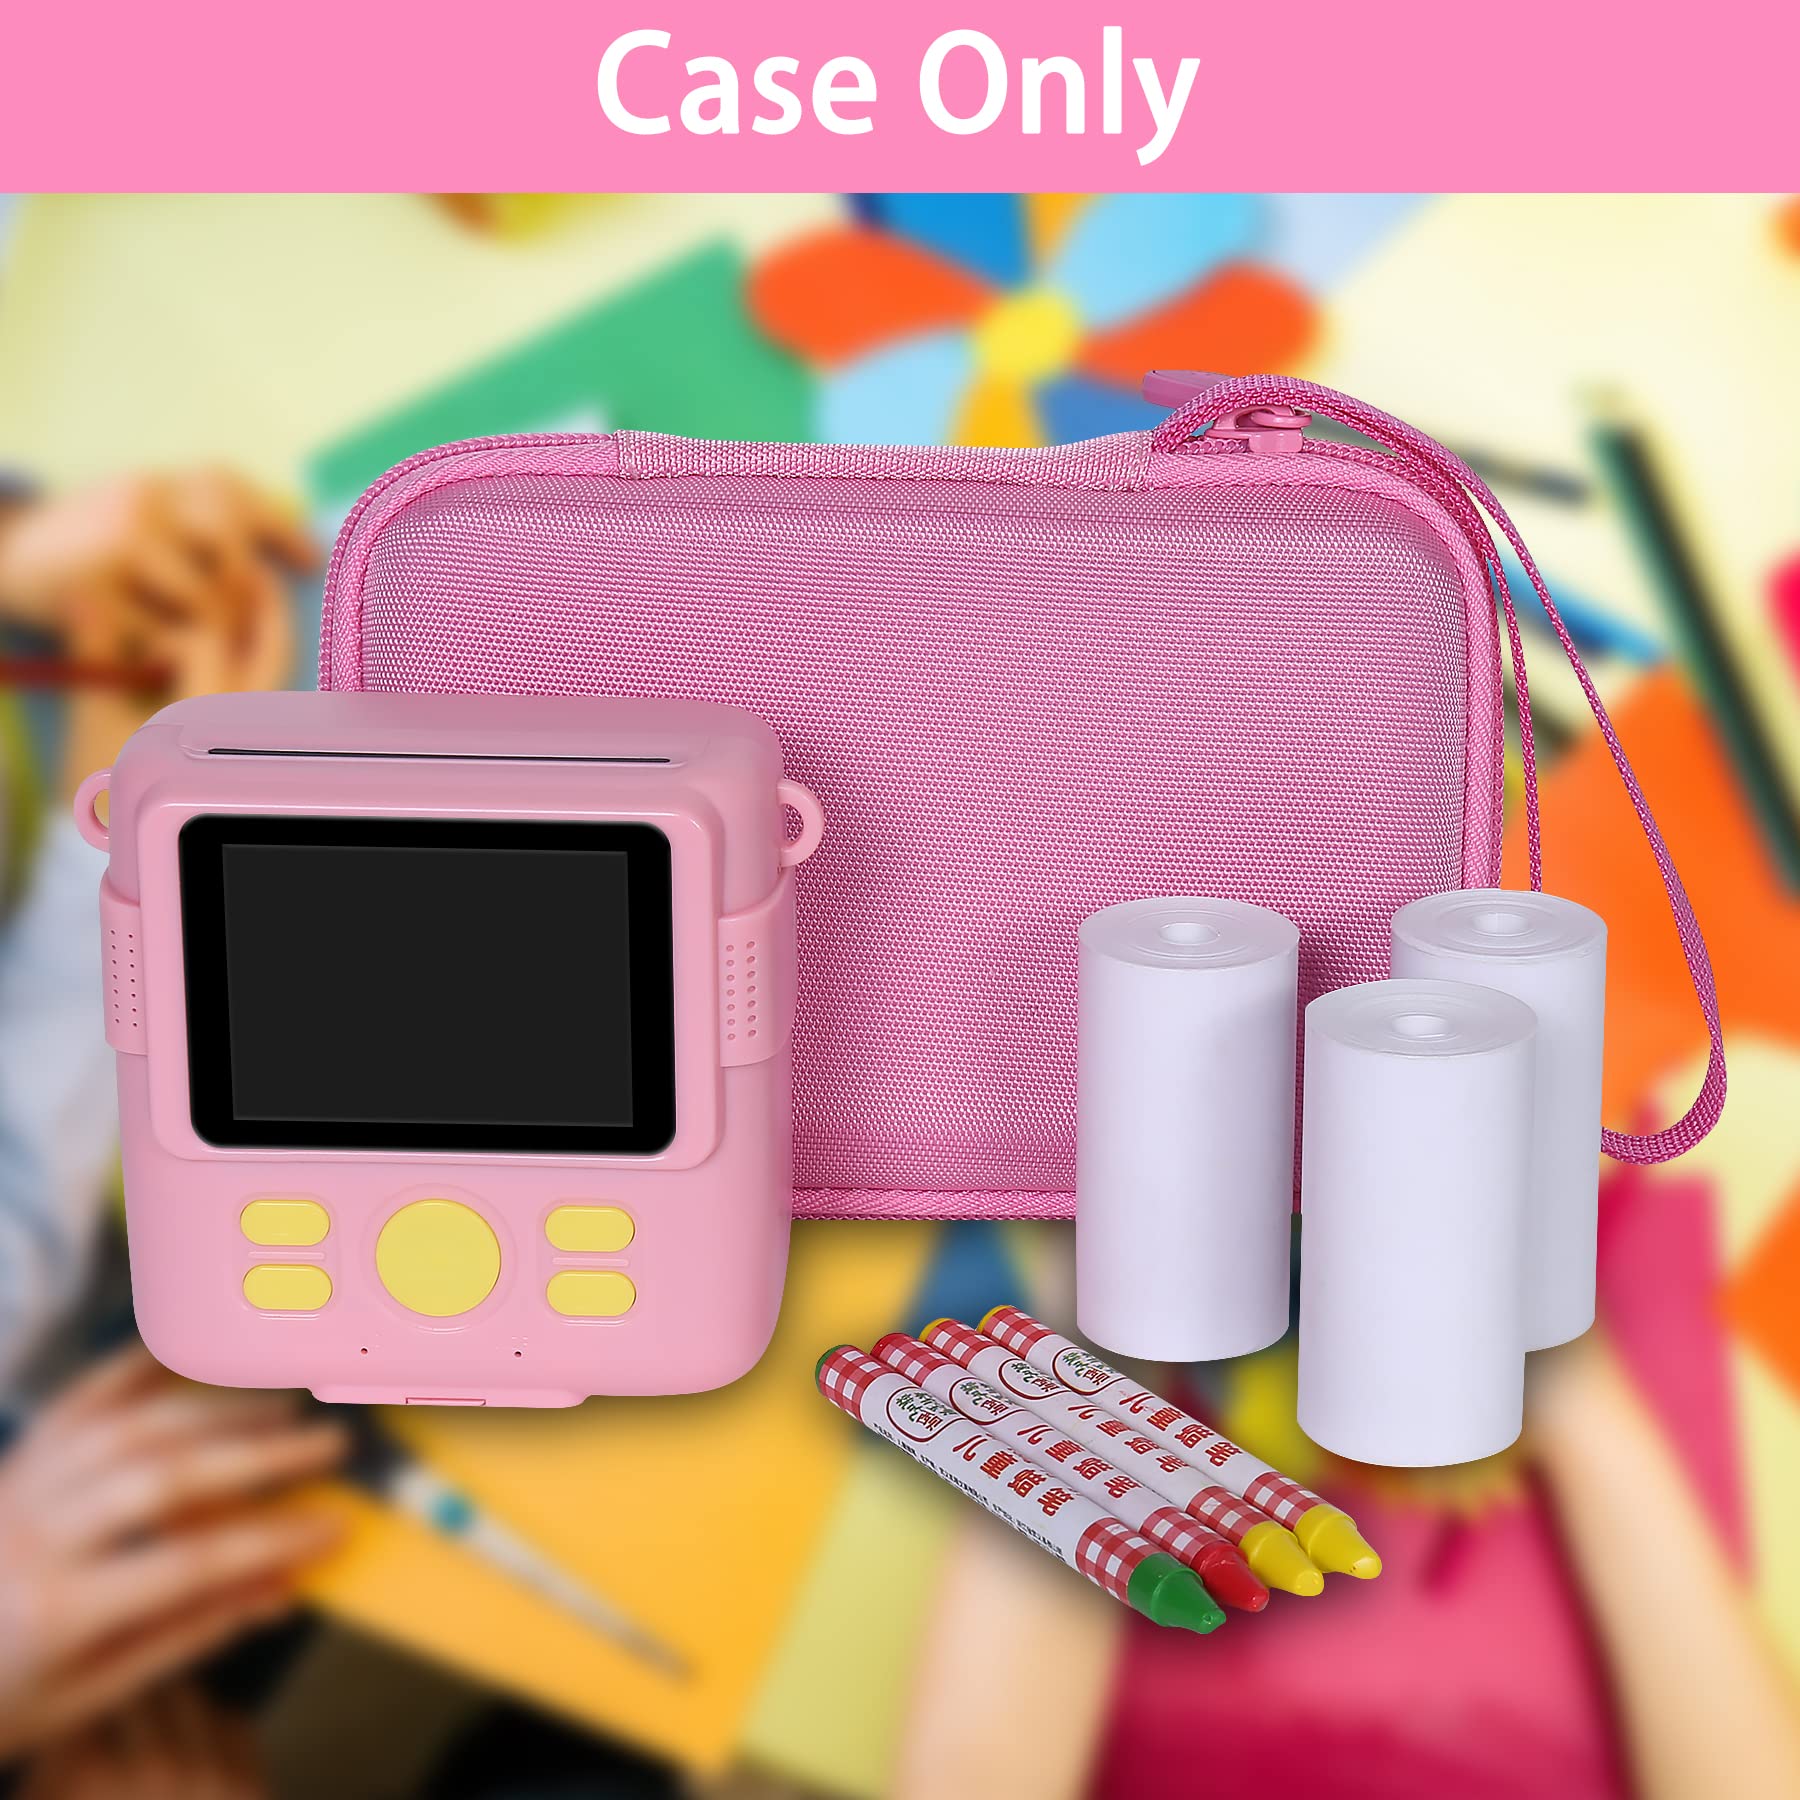 Aenllosi Kids Camera Case for Anchioo/for ESOXOFFORE Instant Print Camera Toys,Kids Selfie Digital Camera Photo Paper & Color Pen Holder (Pink,Case Only)